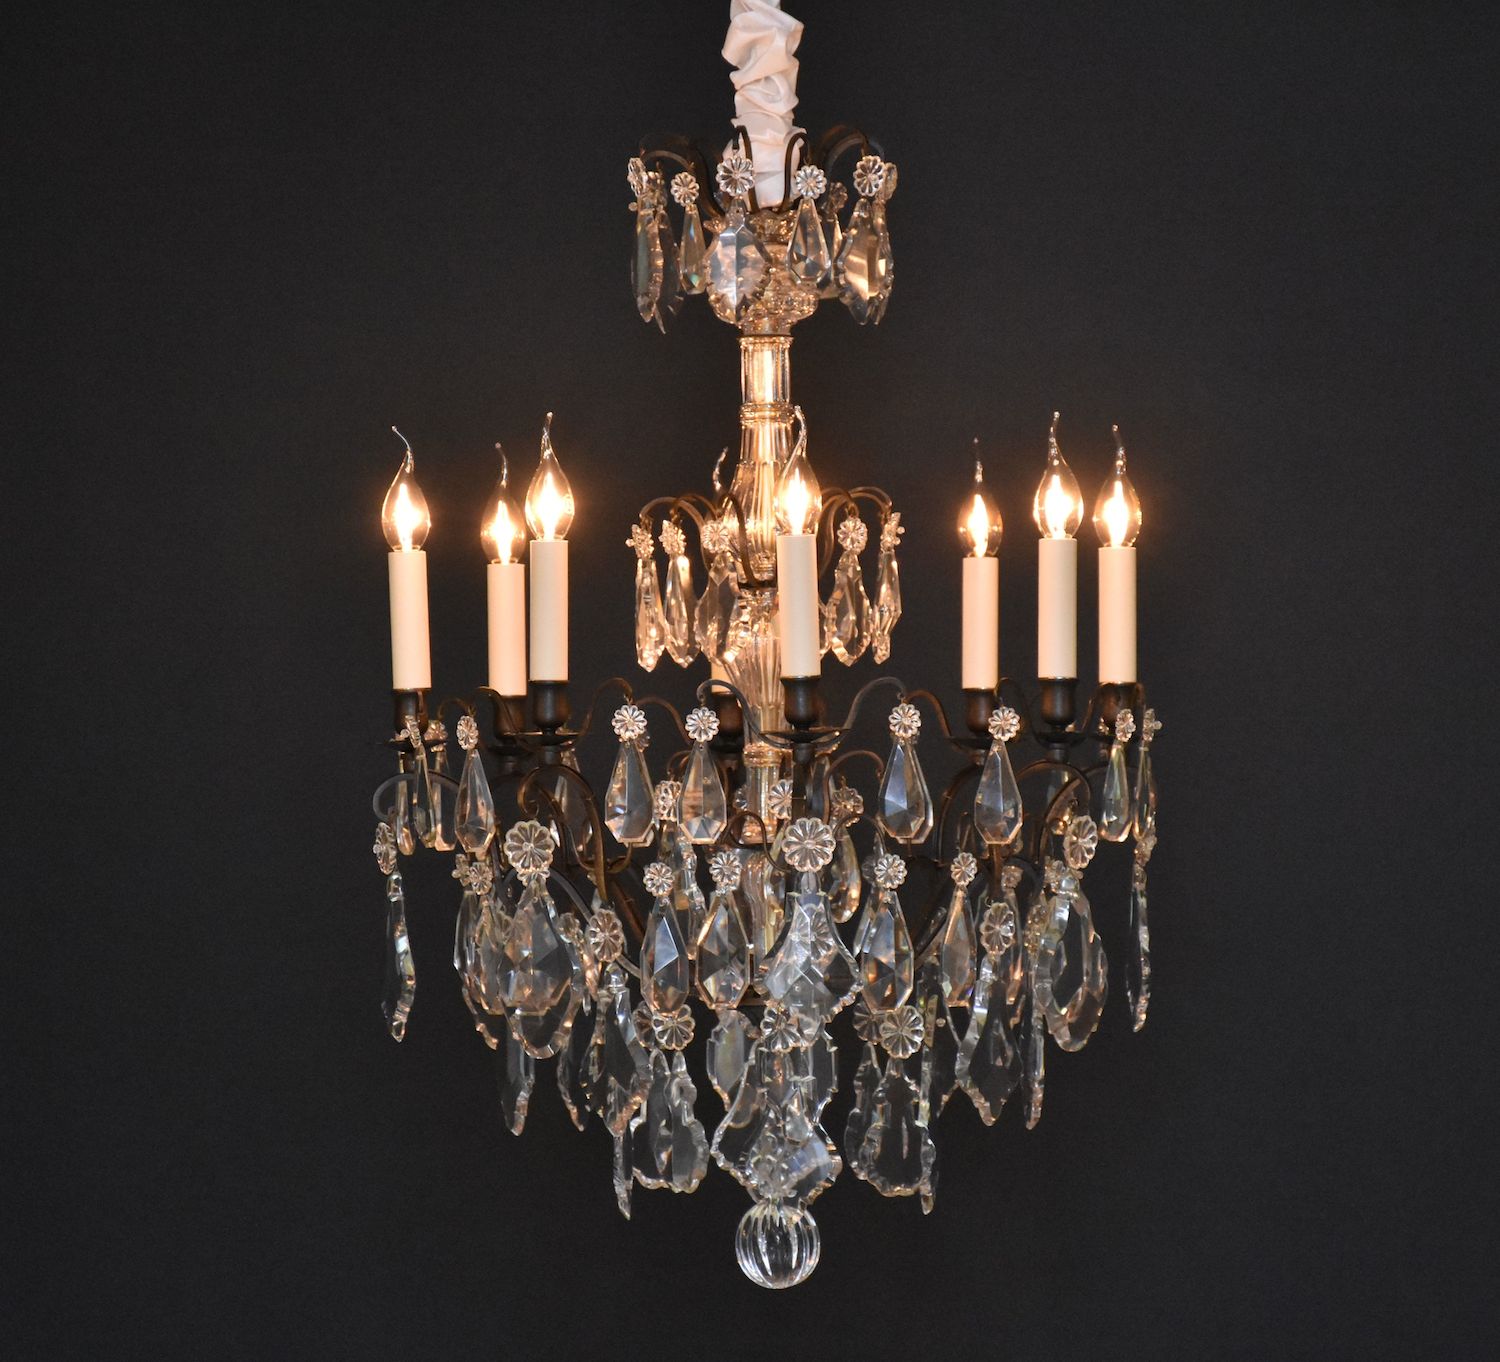 French chandelier with dark patina 'Lustre a tige'